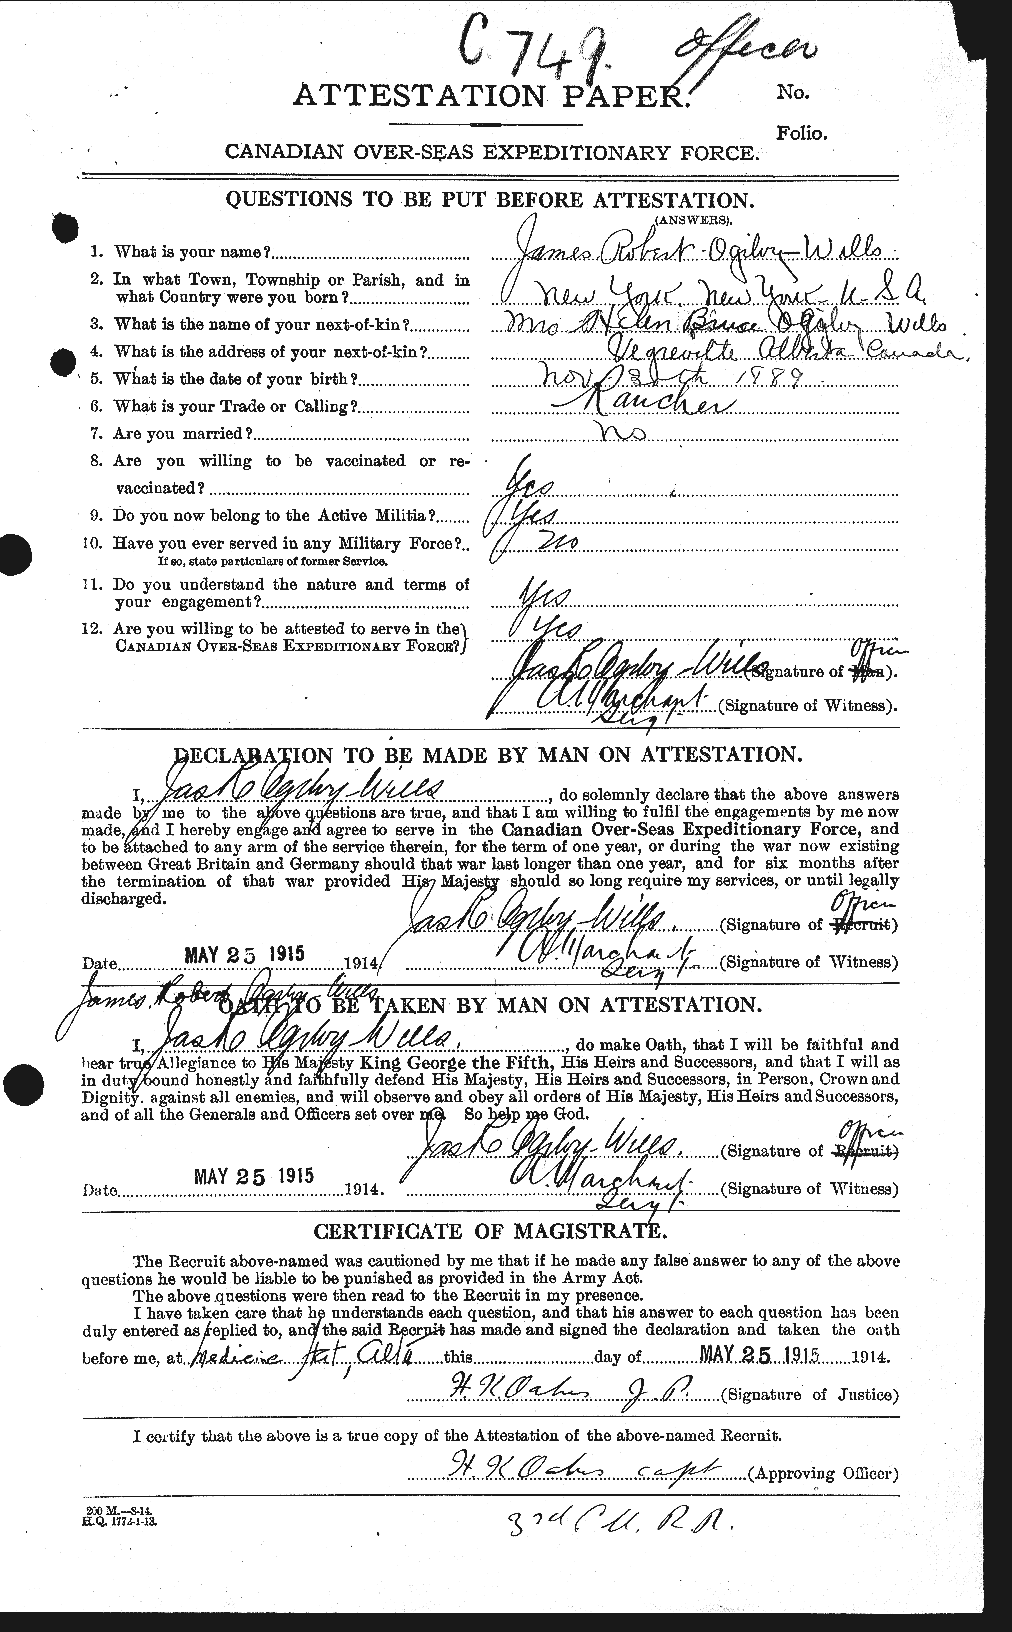 Personnel Records of the First World War - CEF 558772a